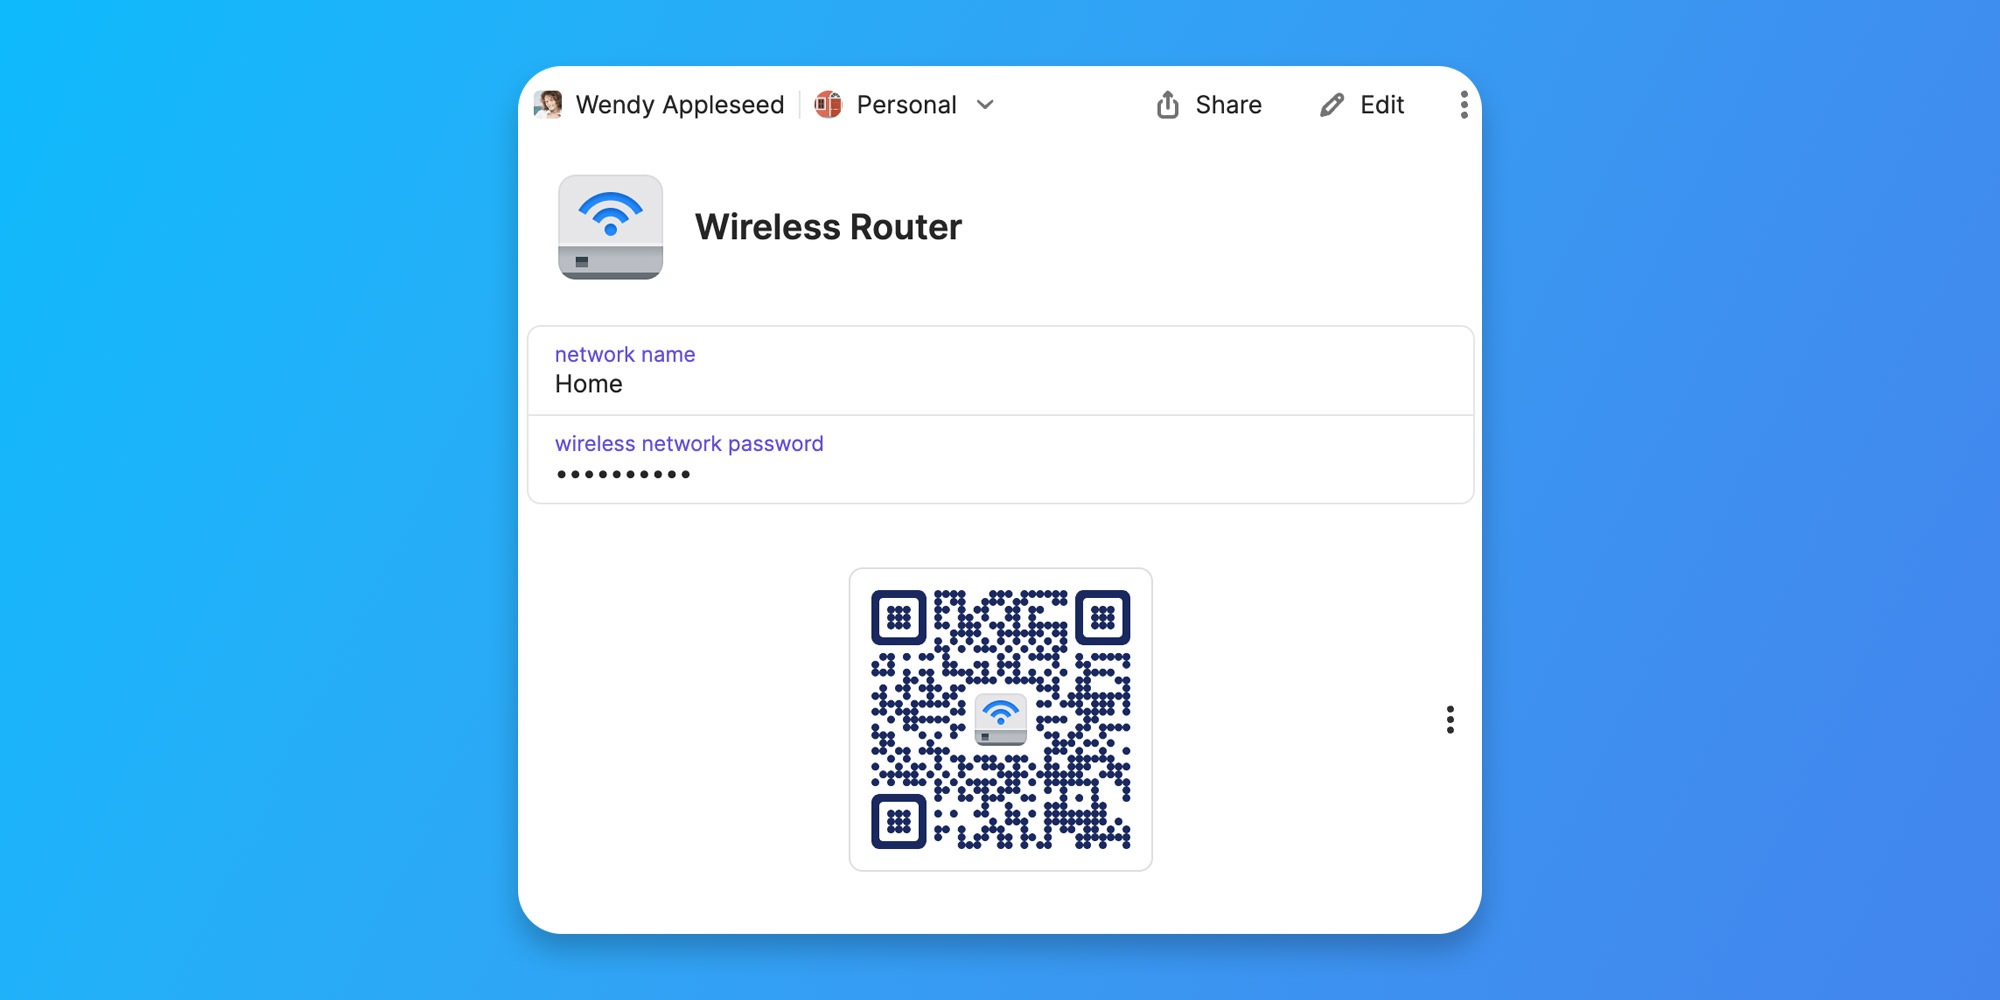 1Password adds the ability to share Wi-Fi password using a QR Code